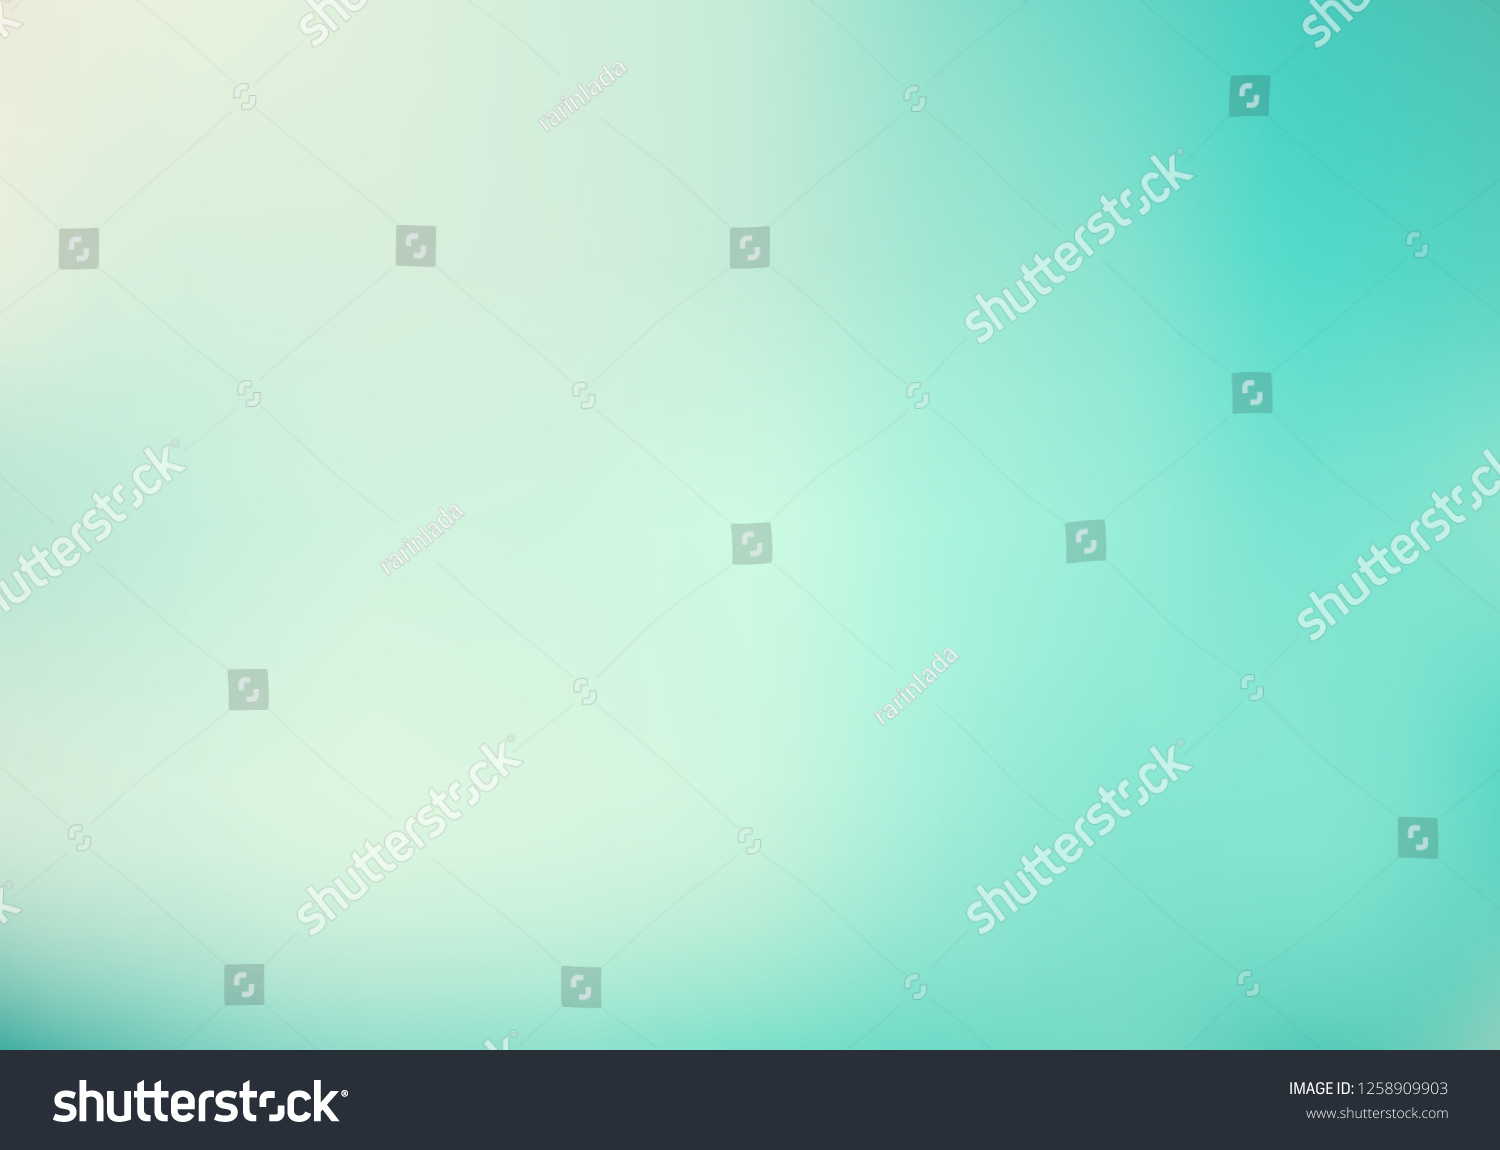 Abstract lighting effect gradient turquoise pastel green mint color background. Vector illustration #1258909903